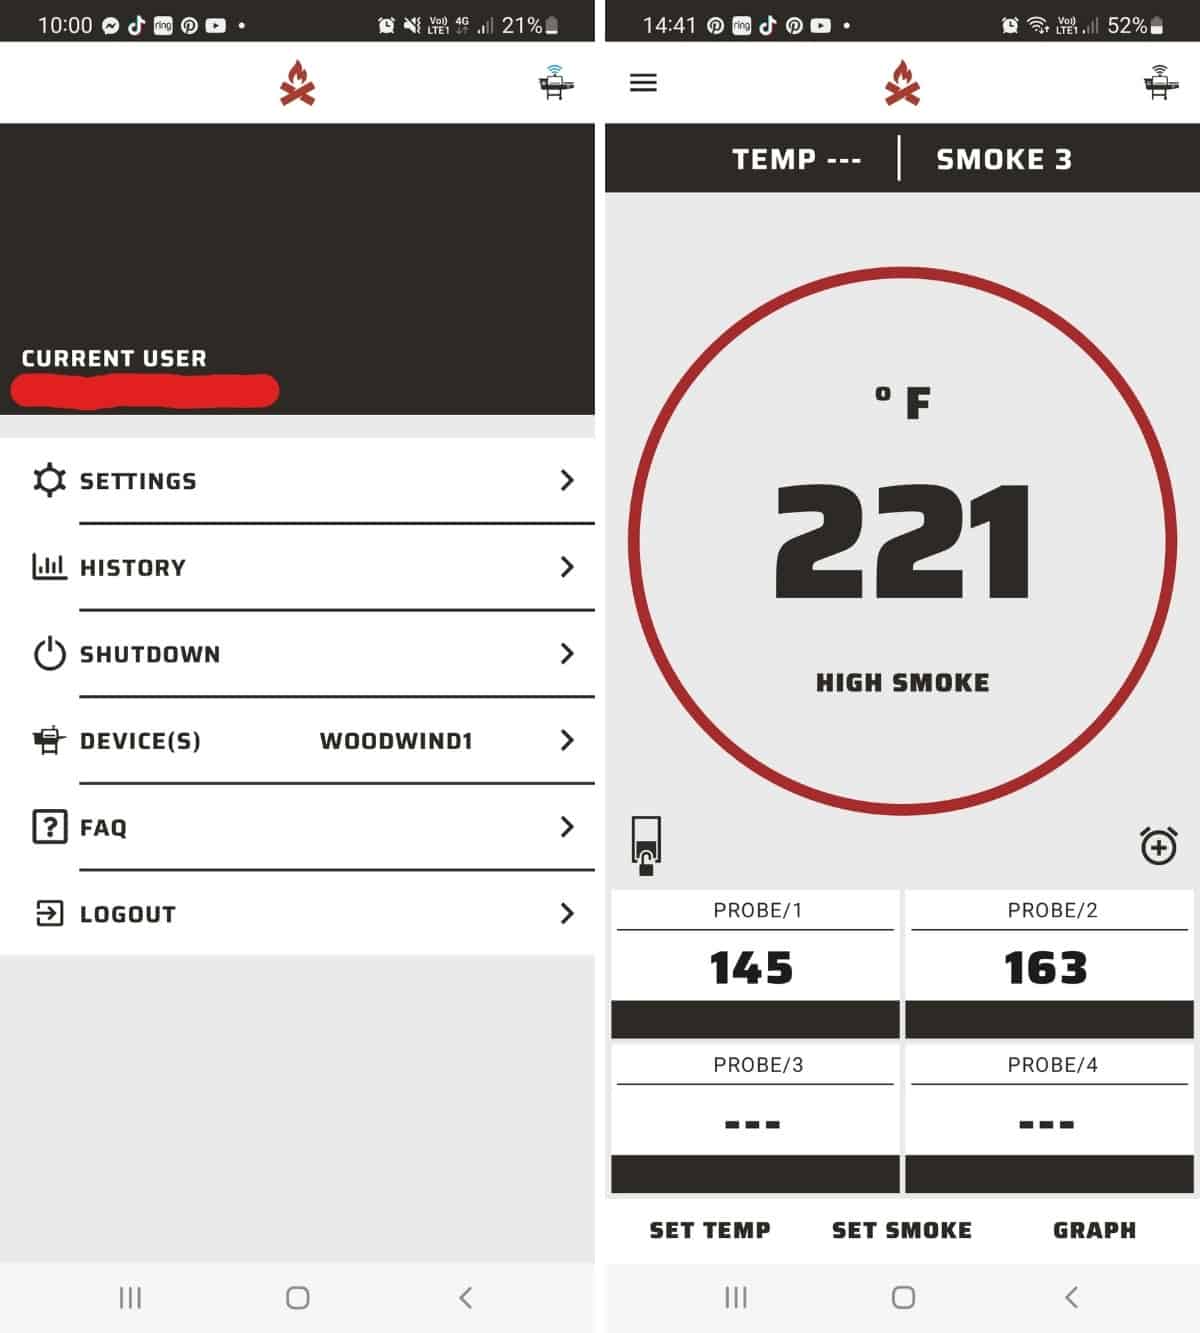 Camp Chef Connect smartphone app screenshots, showing a settings screen, and probe temperatures, side by side